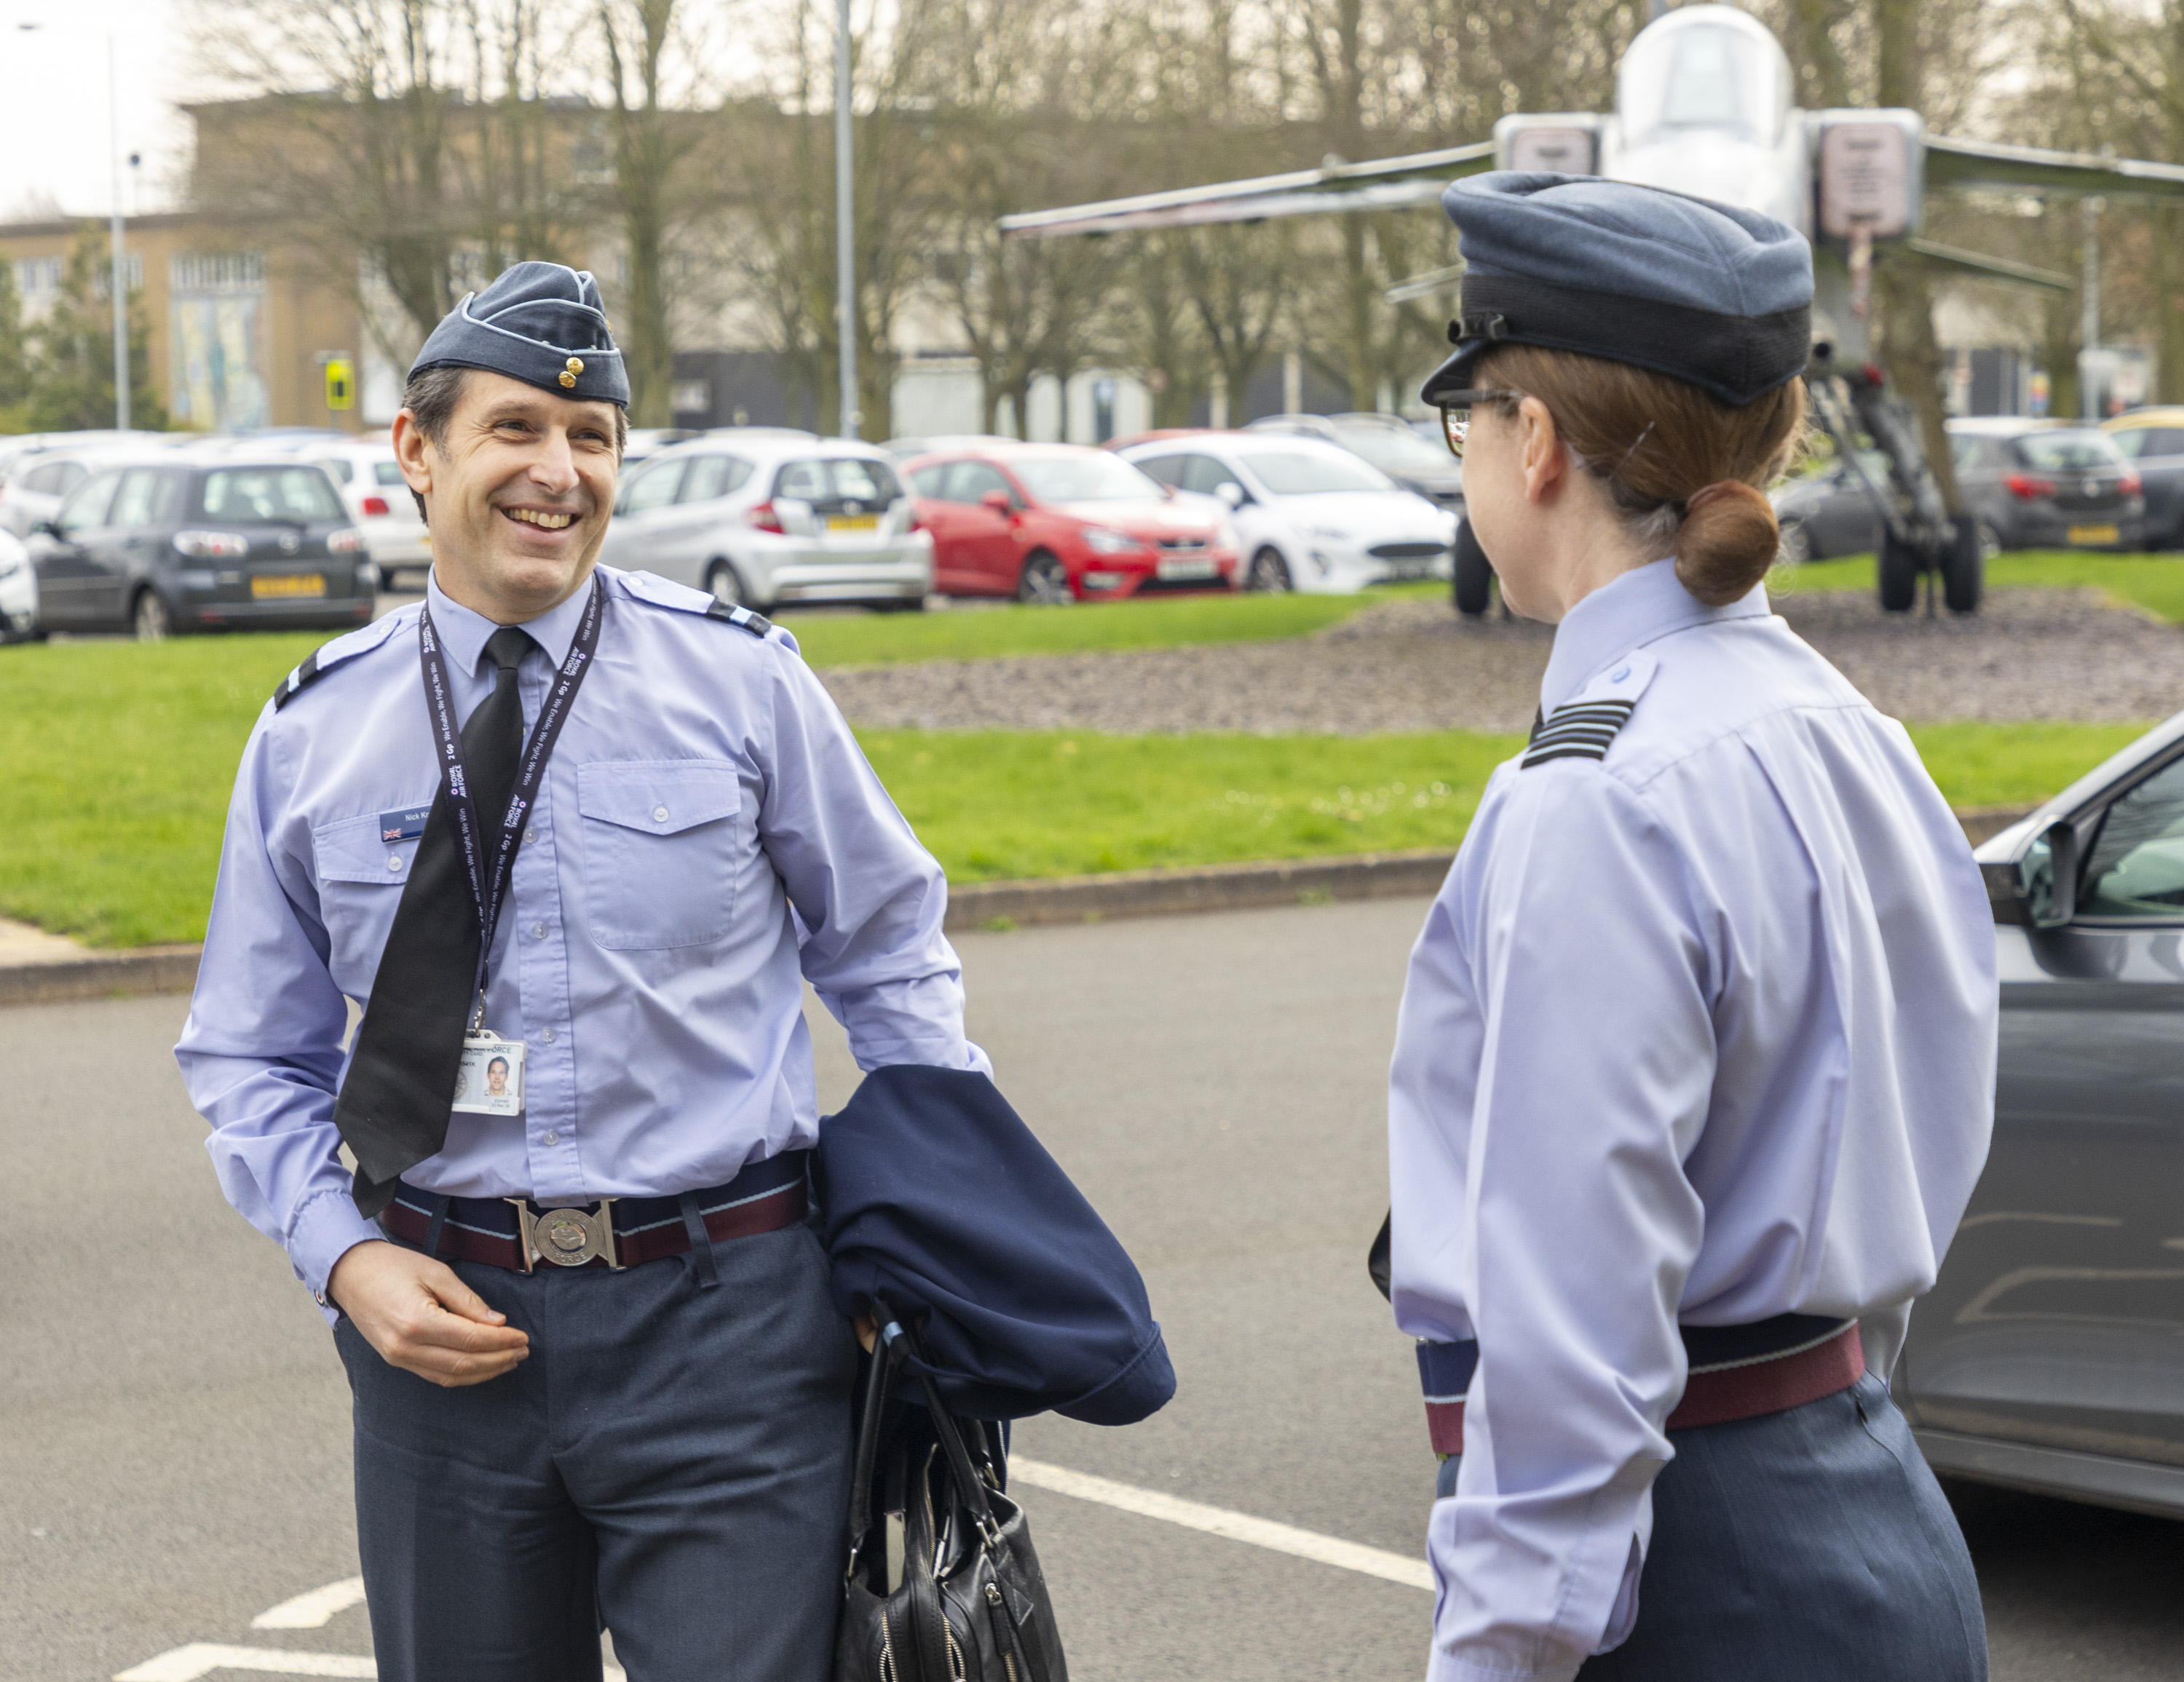 Dep AOC 2Gp arriving to RAF Cosford and being met by Stn Cdr Wg Cdr Penny Brady